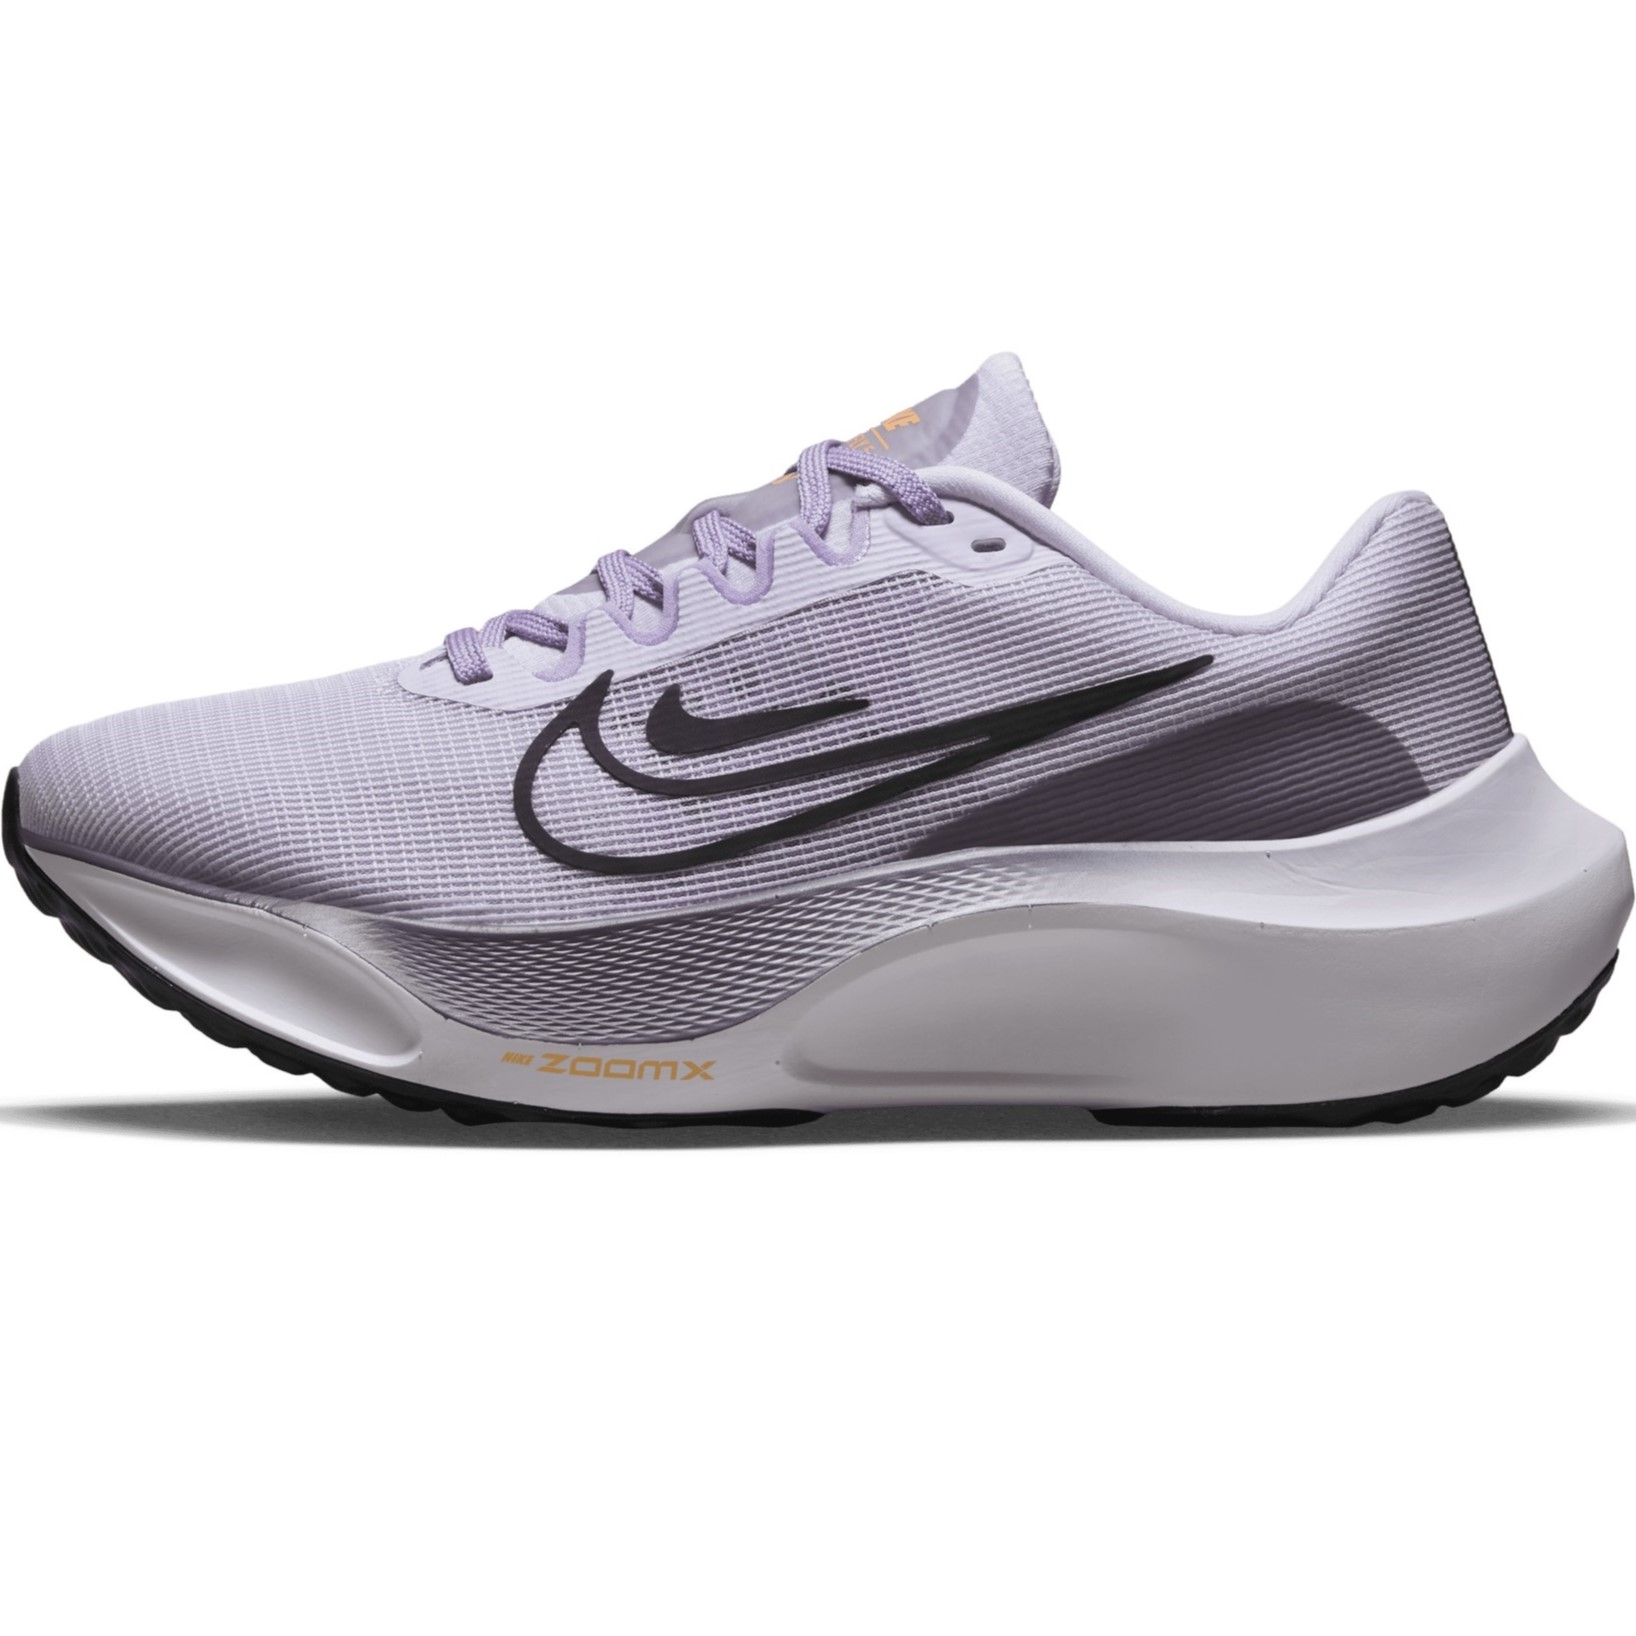 GIÀY THỂ THAO NIKE NỮ ZOOM FLY 5 WOMEN ROAD RUNNING SHOES BARELY GRAPE DM8974-500 8